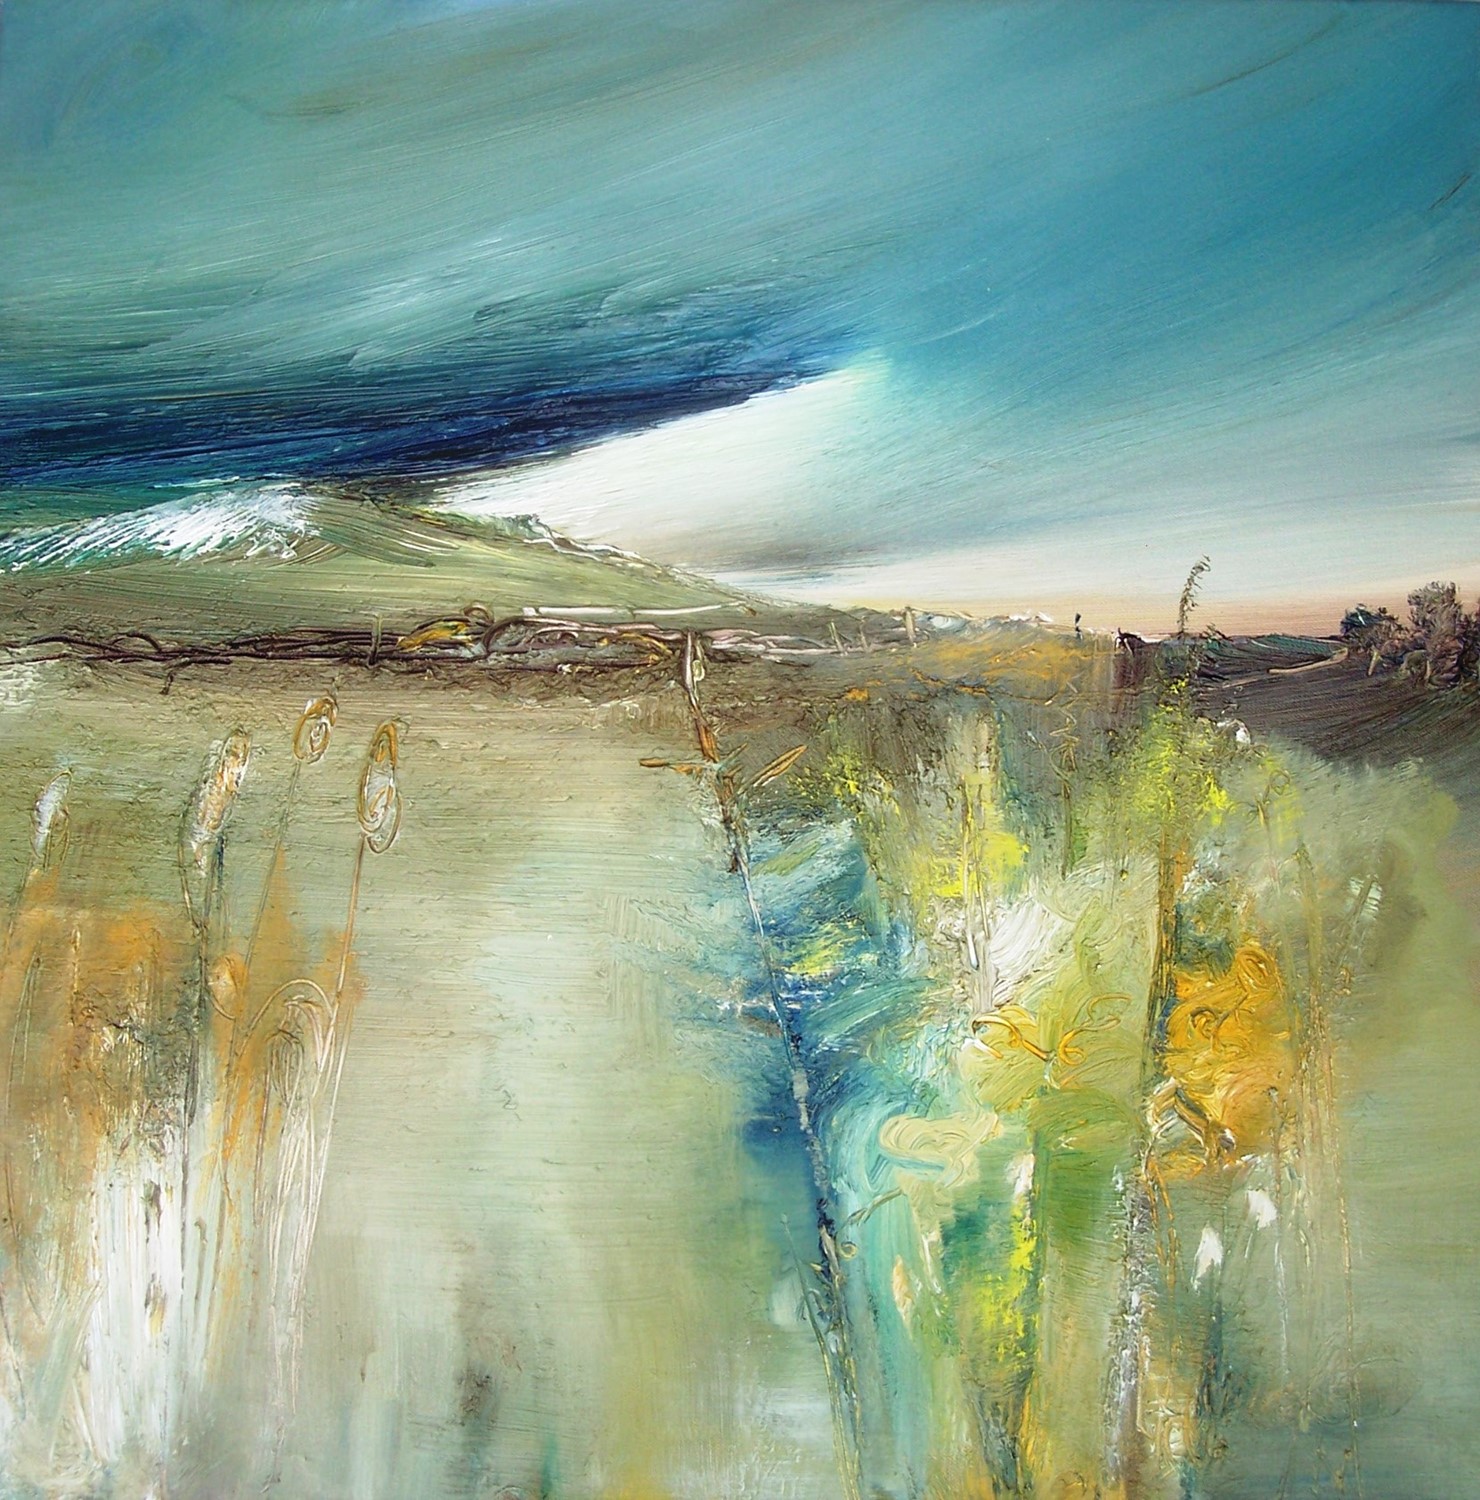 'In shadow of the glade 93x 93 cm Oil' by artist Rosanne Barr